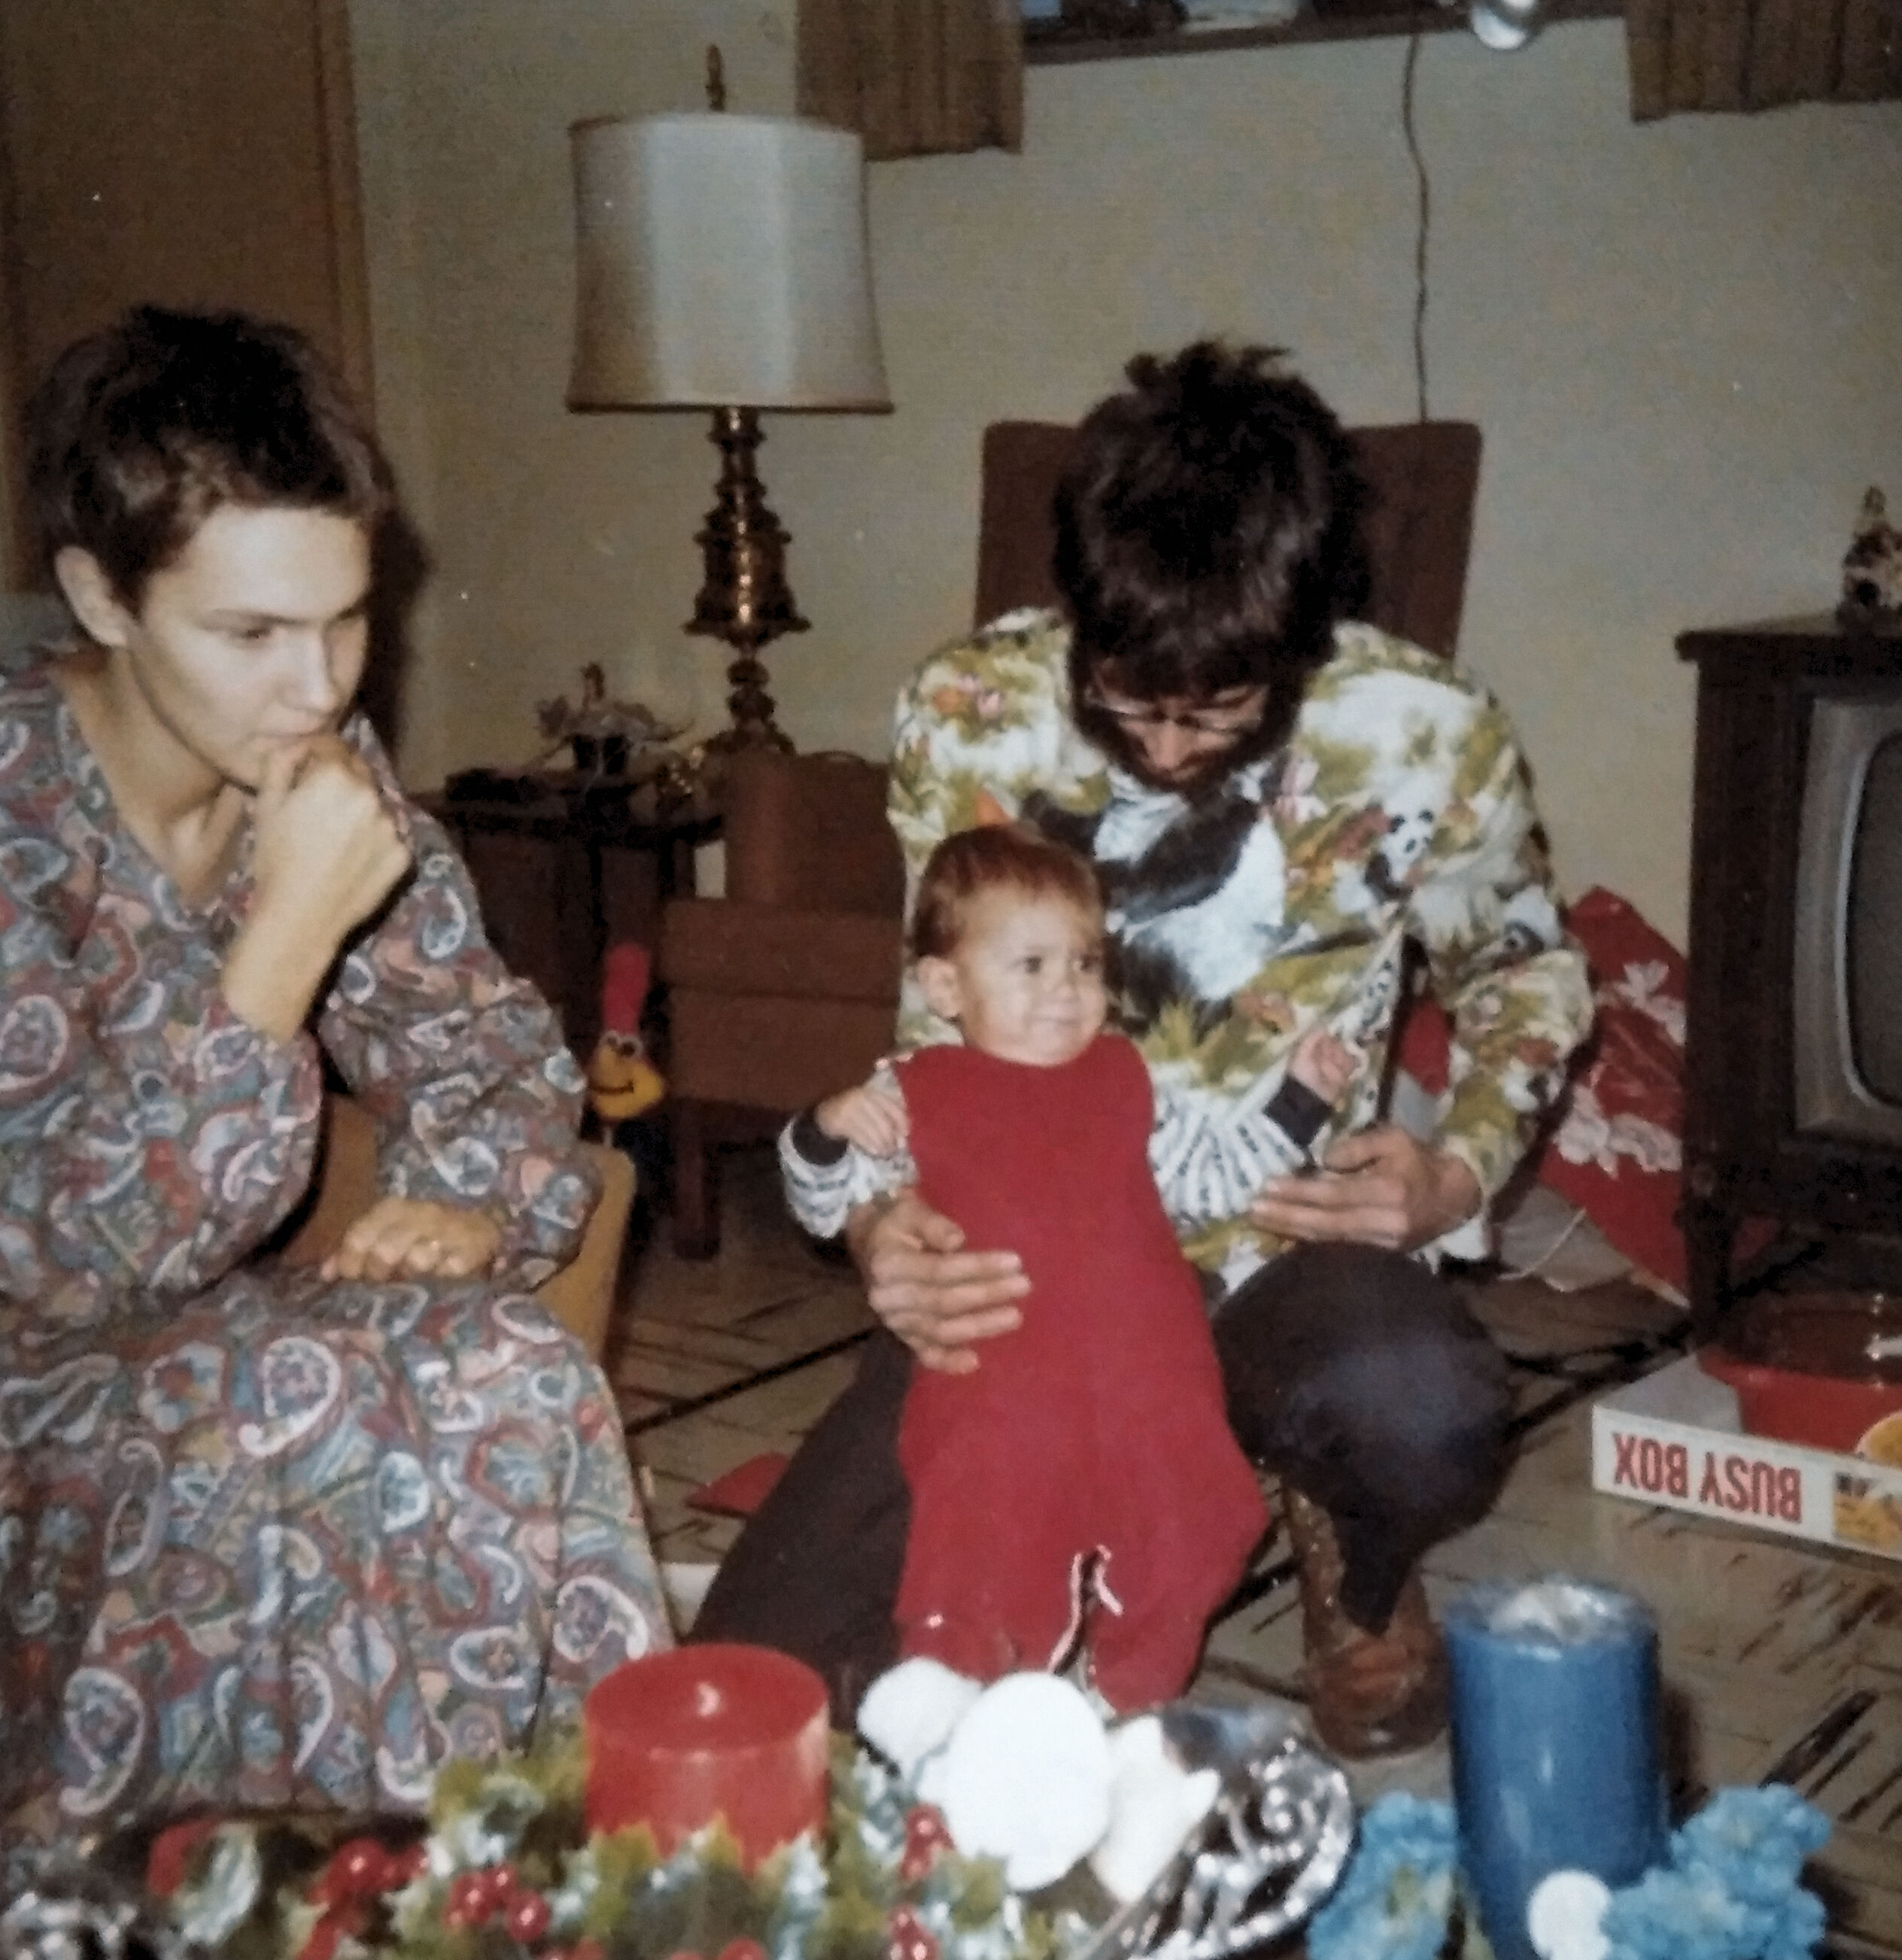 Christmas 1973 at Betsy s parents house. Betsy, homemade dress. Bob, Neru panda jacket that he sewed himself
Troy, 11 months old